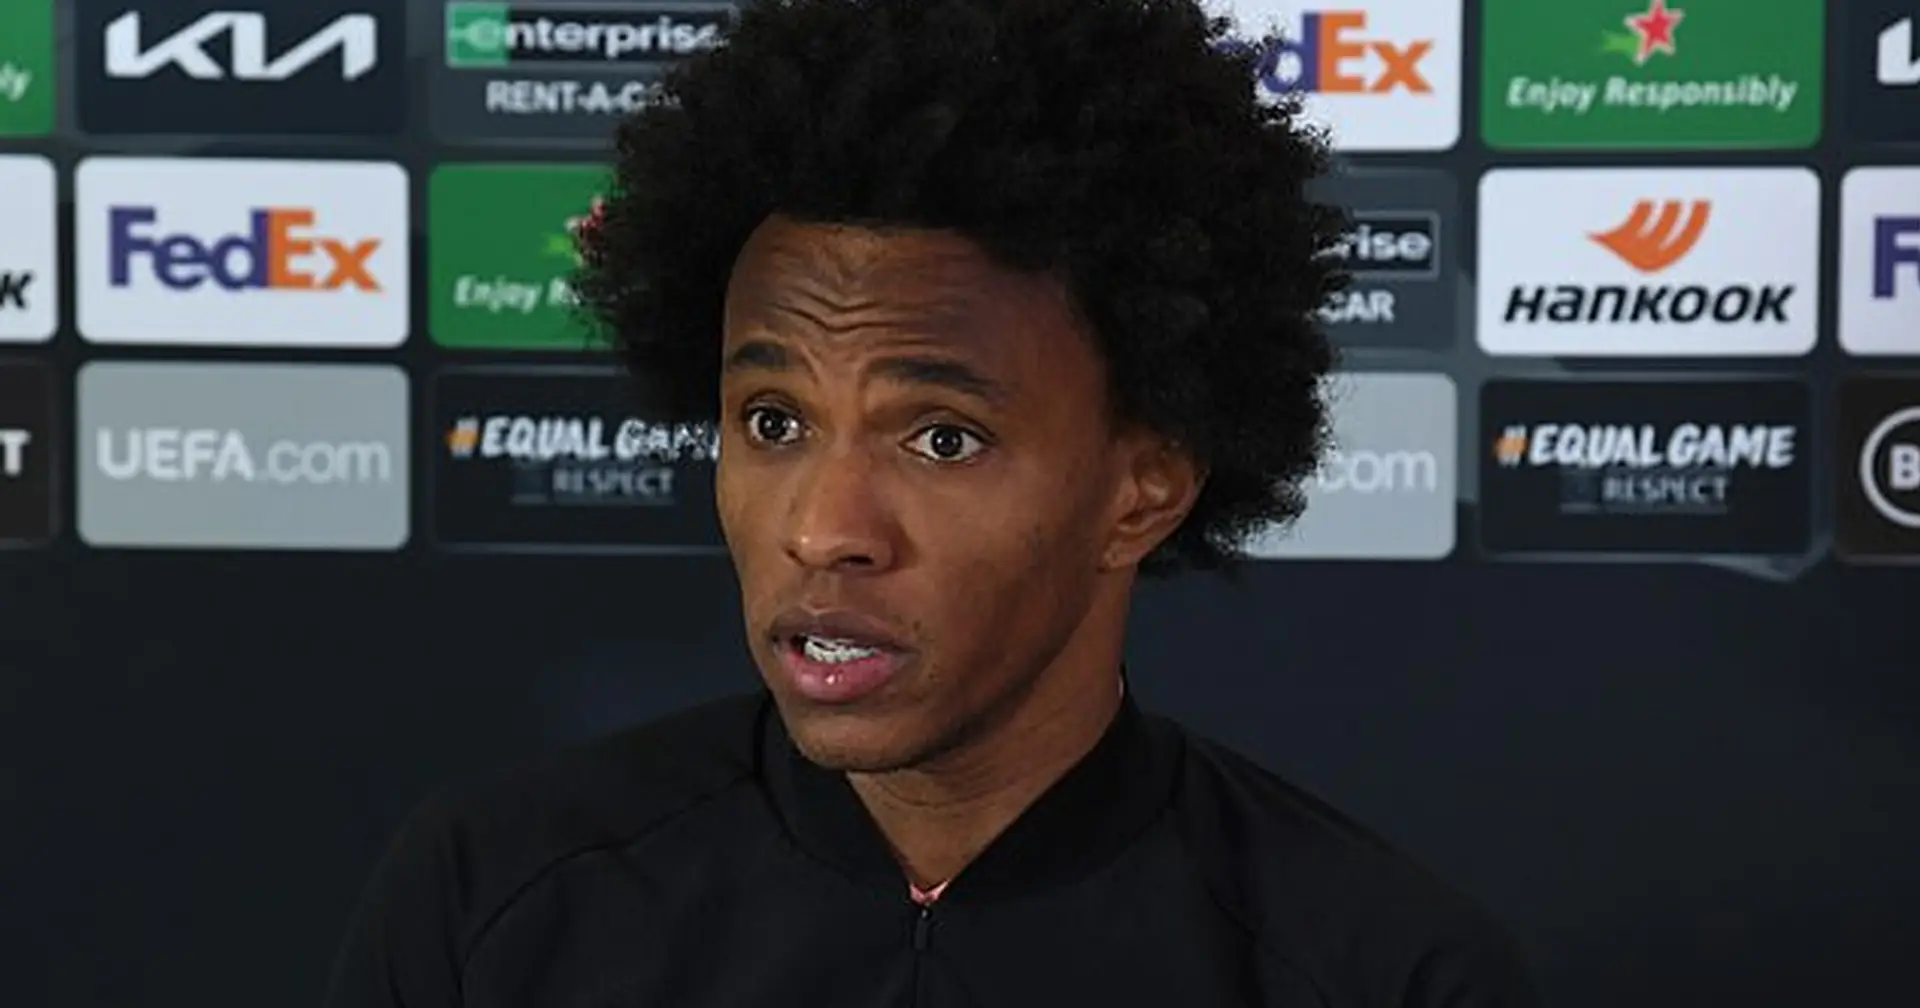 'We speak about that, but we want action': Willian calls on social media companies to deal with online racist abuse